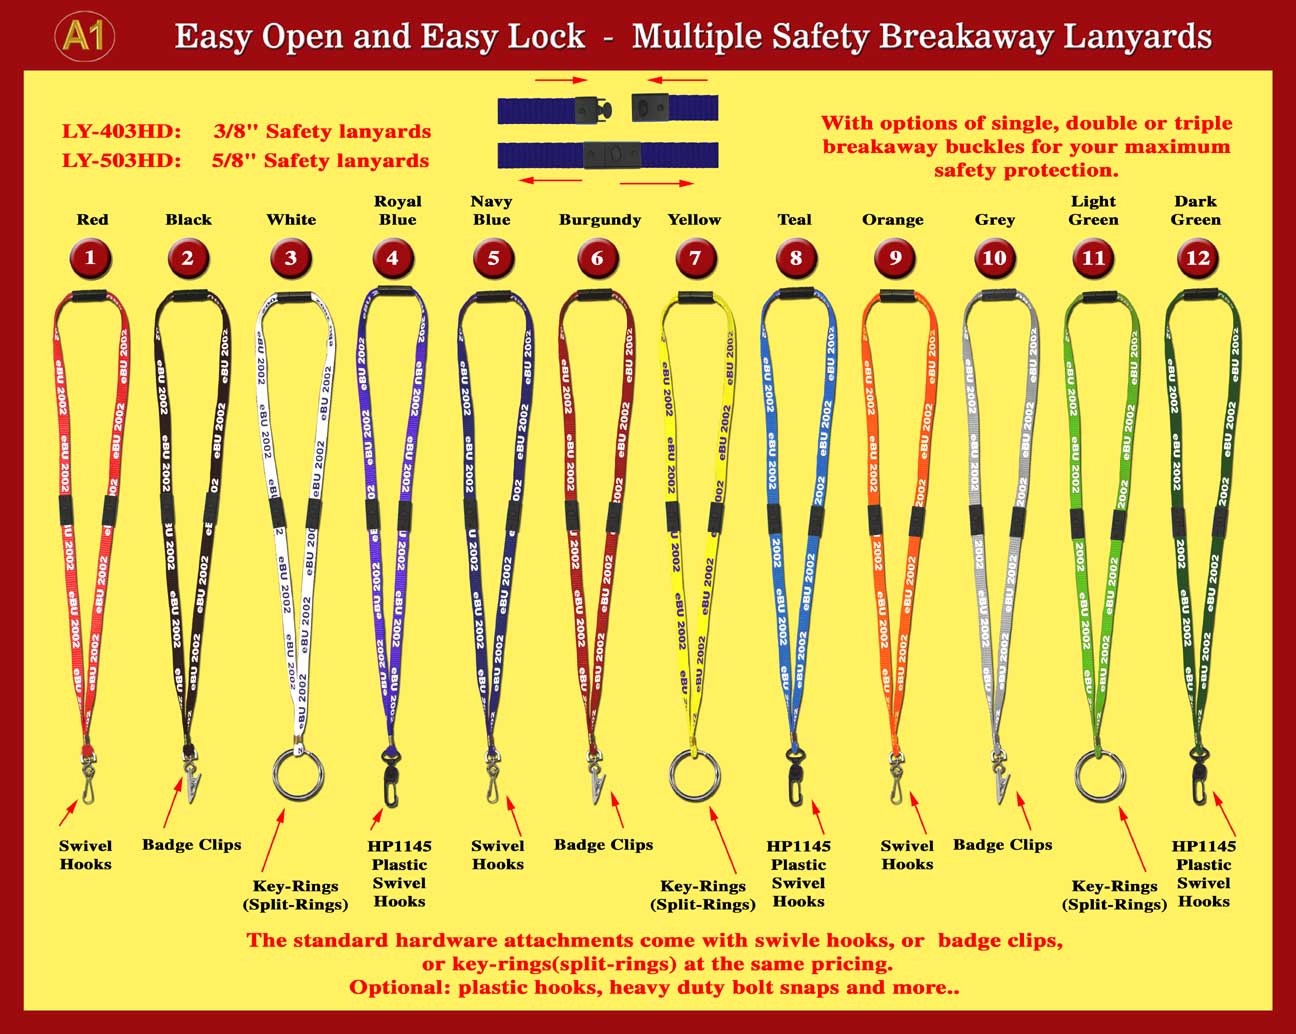 Multiple Safety Breakaway lanyard For Your Maximum Safety Protection